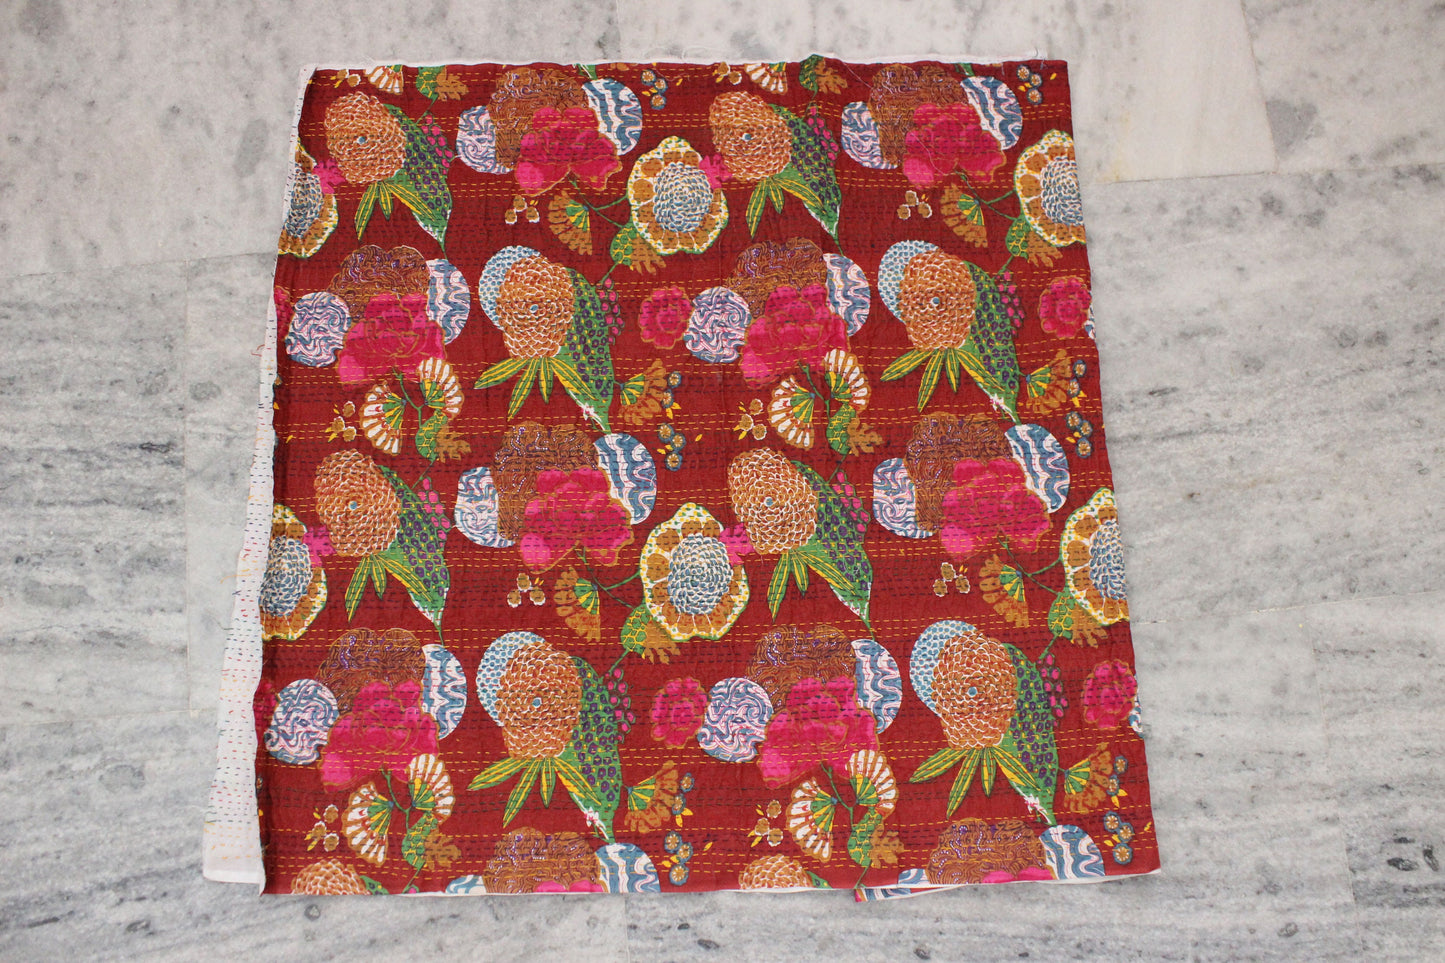 Maroon Boho Indian Fabric By The Yard Embroidered Indian Textile Fabric Embellished Fabric Floral Printed Home Decor Fabric Kantha Fabrics